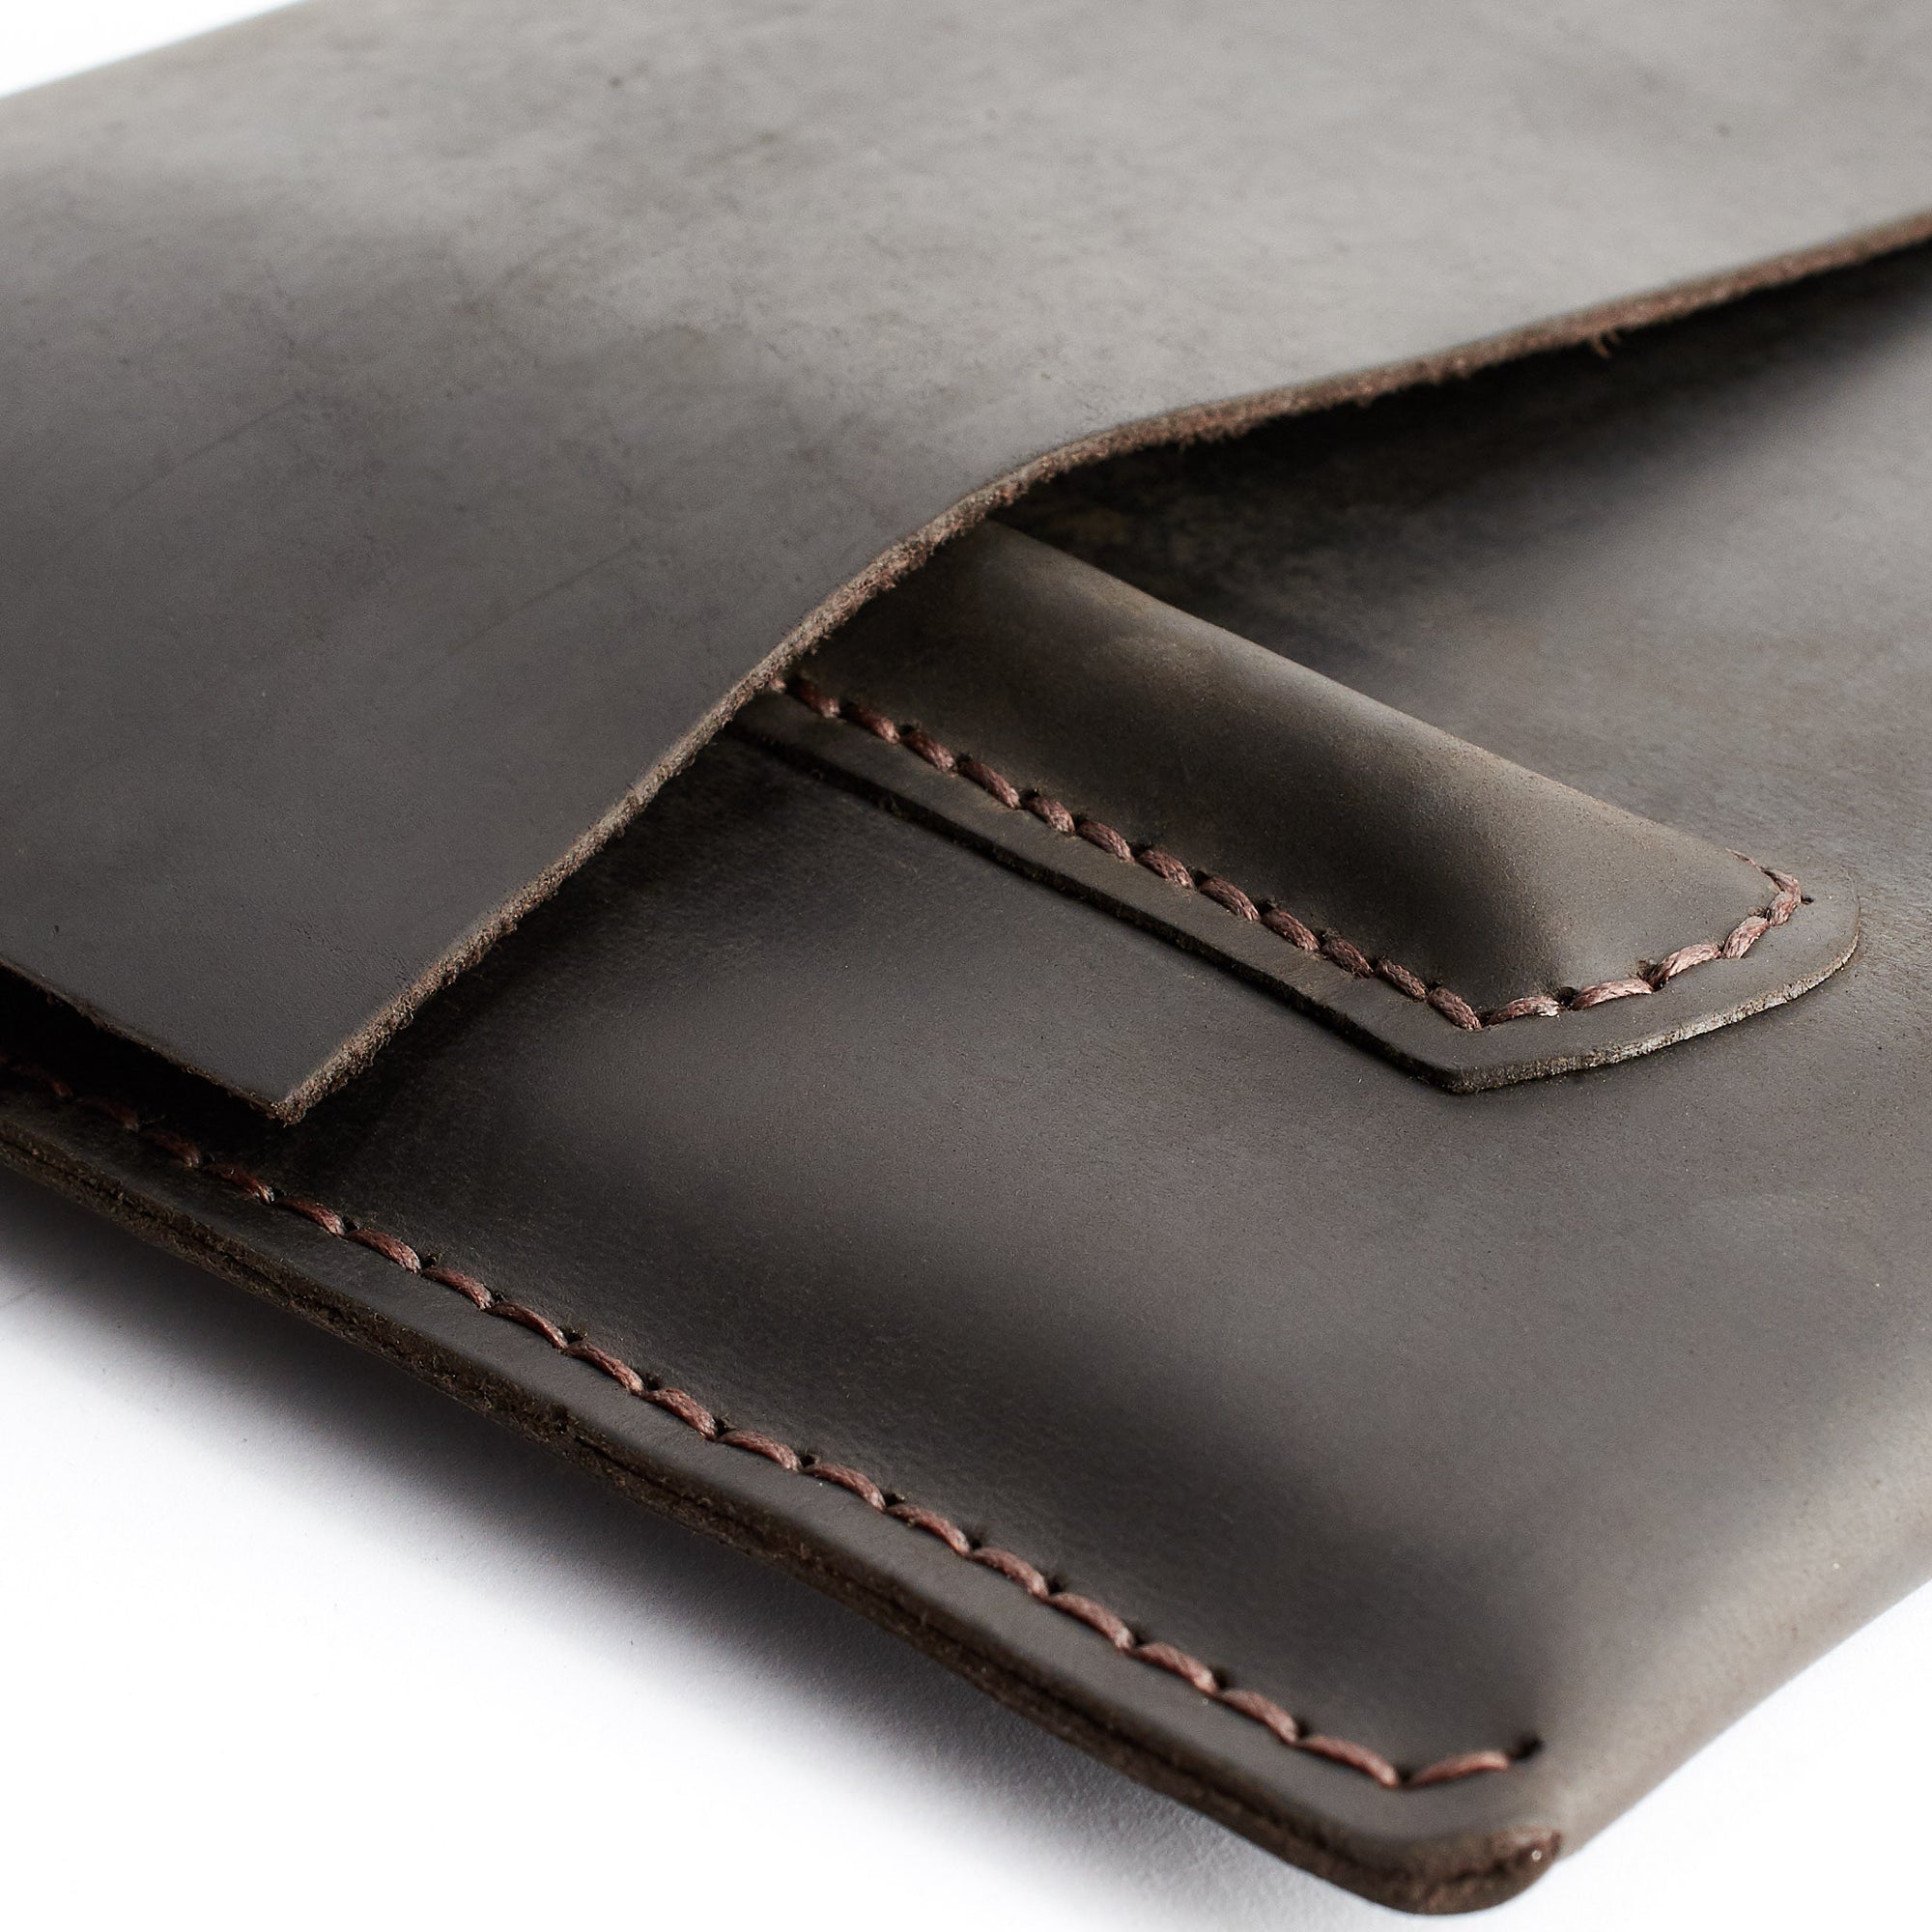 Hand Stitch. iPad Sleeve. iPad Leather Case Brown With Apple Pencil Holder by Capra Leather